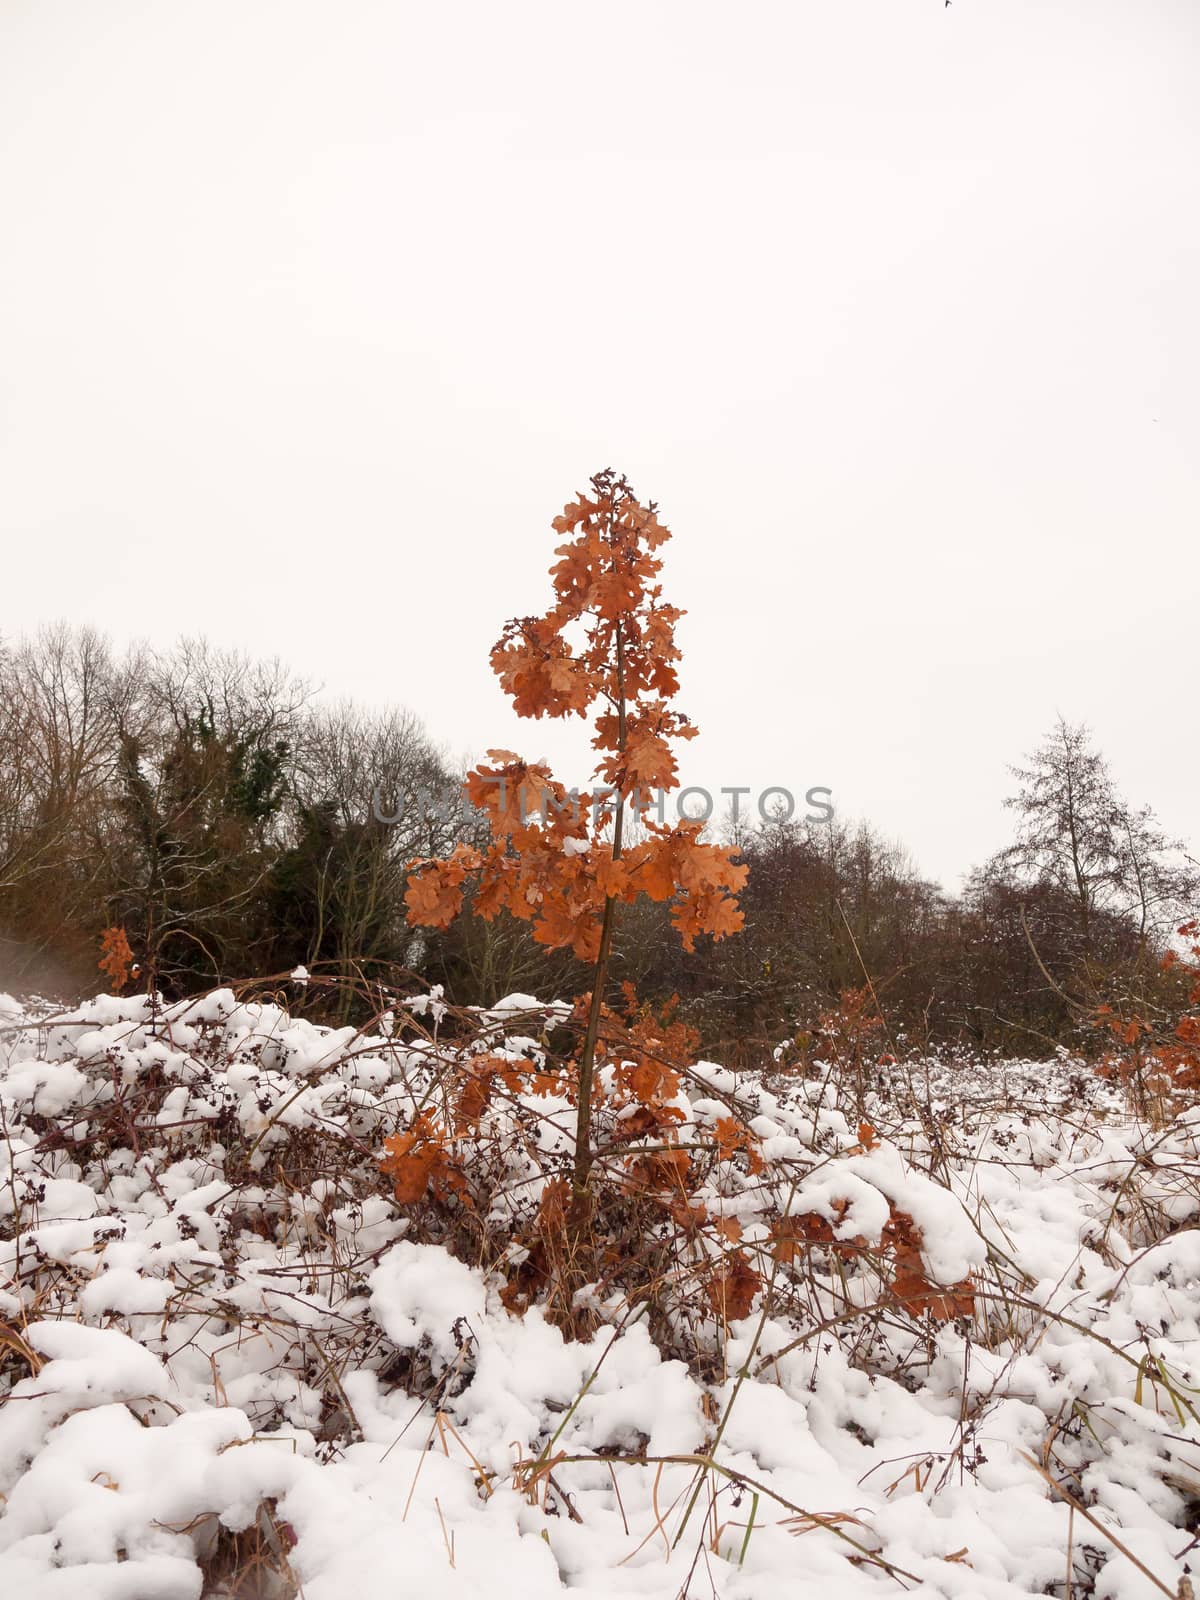 red brown dead tree leafs winter autumn december with snow aroun by callumrc